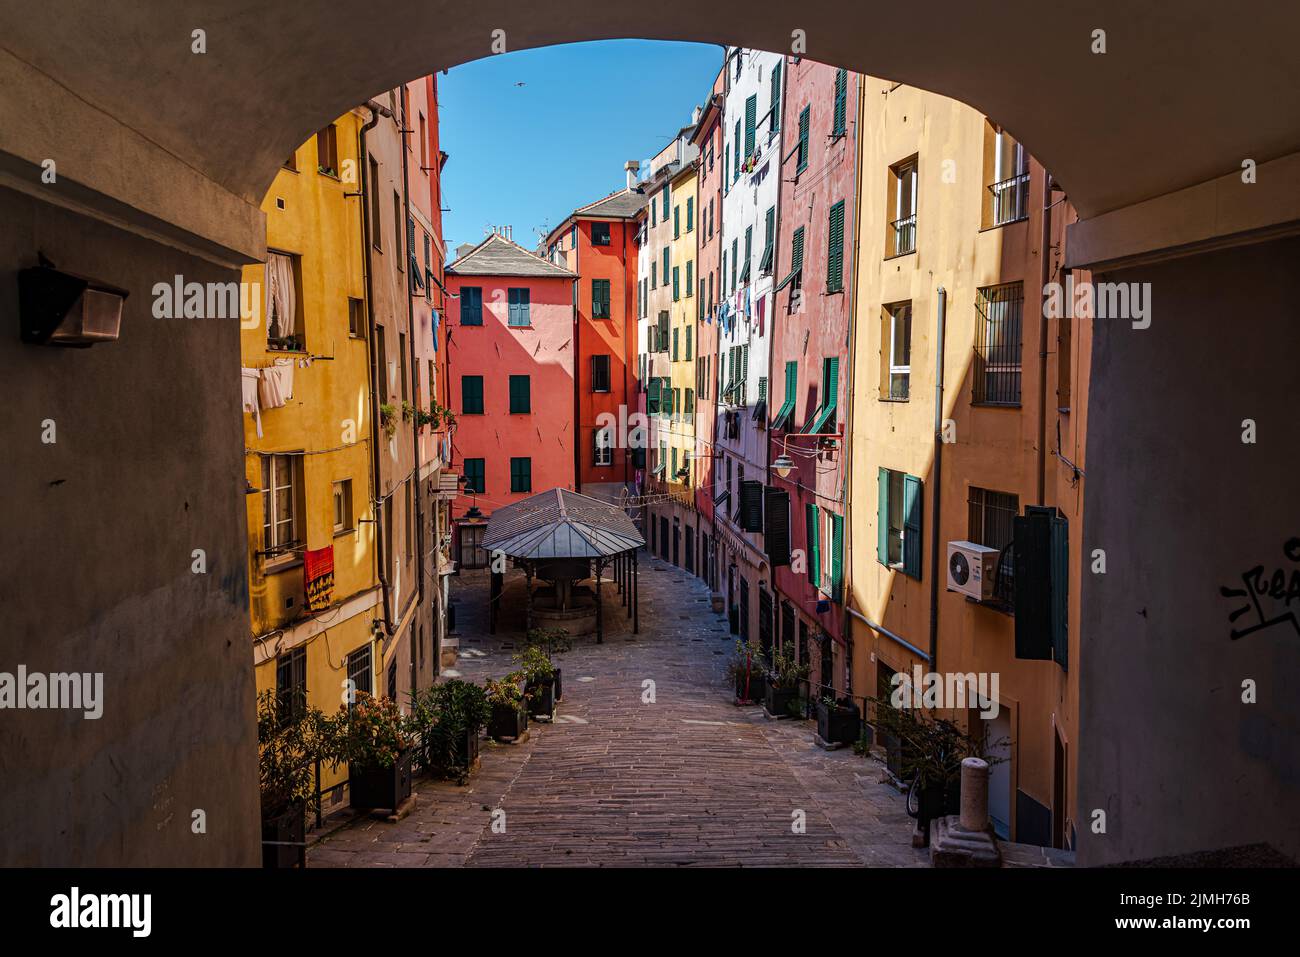 Little square in the old town of Genoa Stock Photo